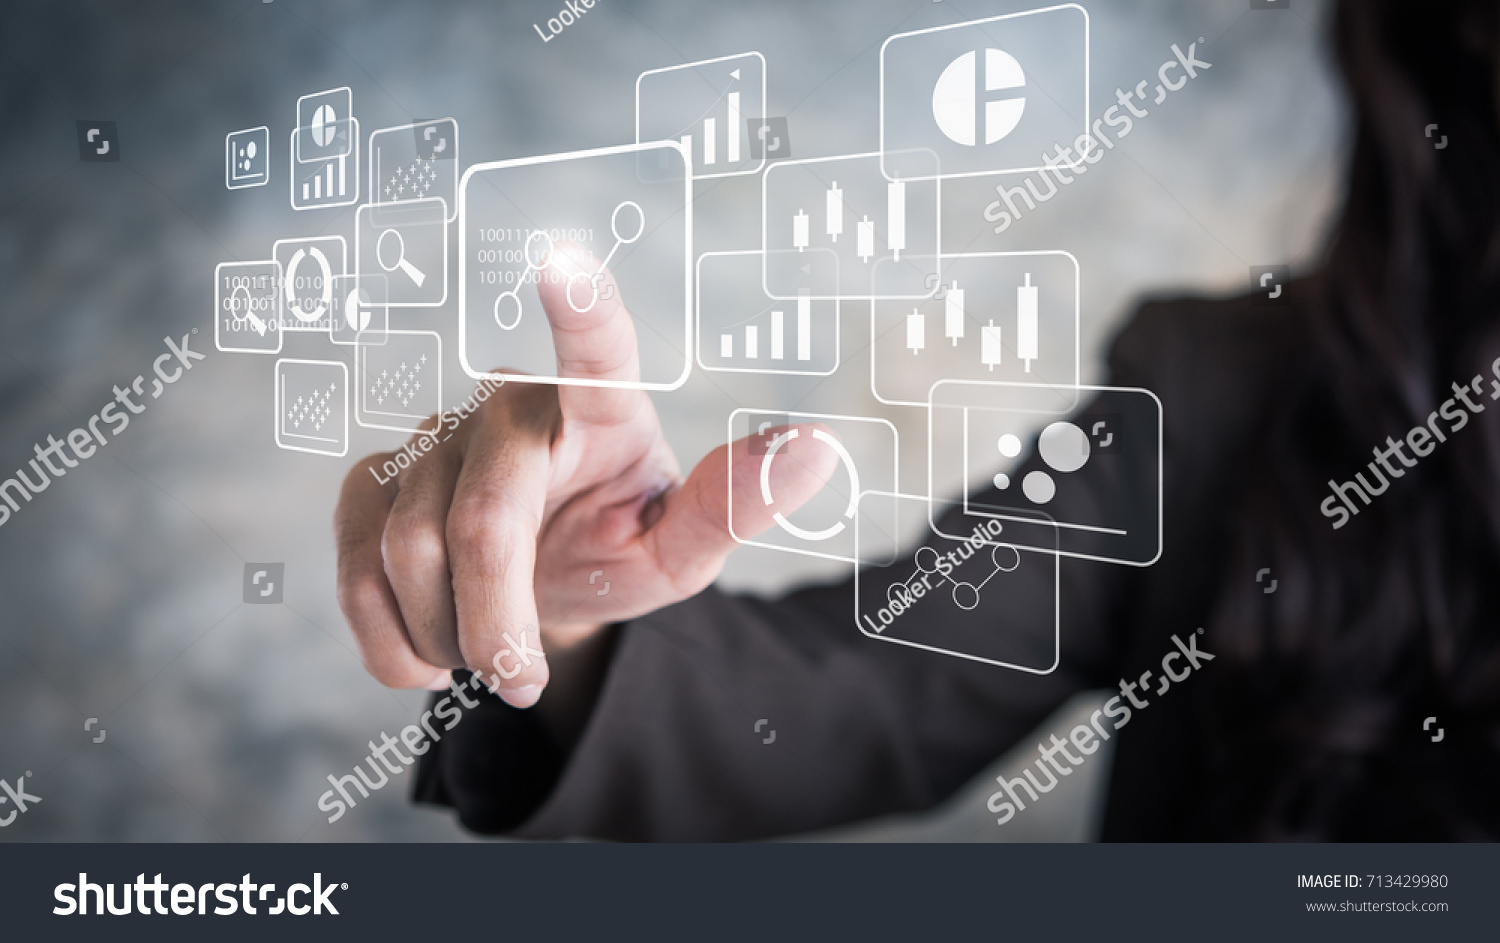 Big data analytics and business intelligence concept with chart and graph icons on a digital screen interface and a businessman in background #713429980